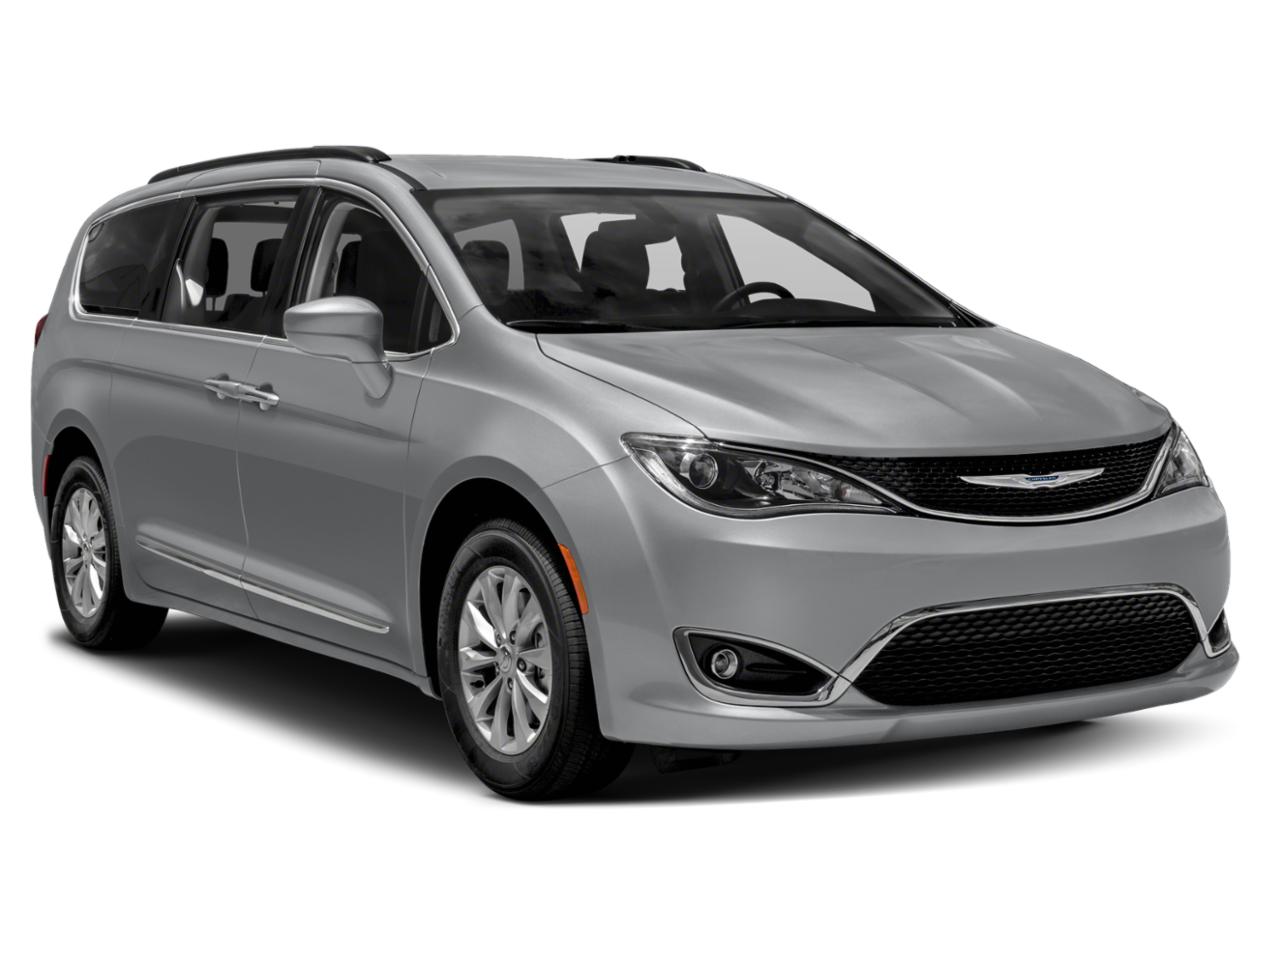 2019 Chrysler Pacifica Vehicle Photo in Ft. Myers, FL 33907